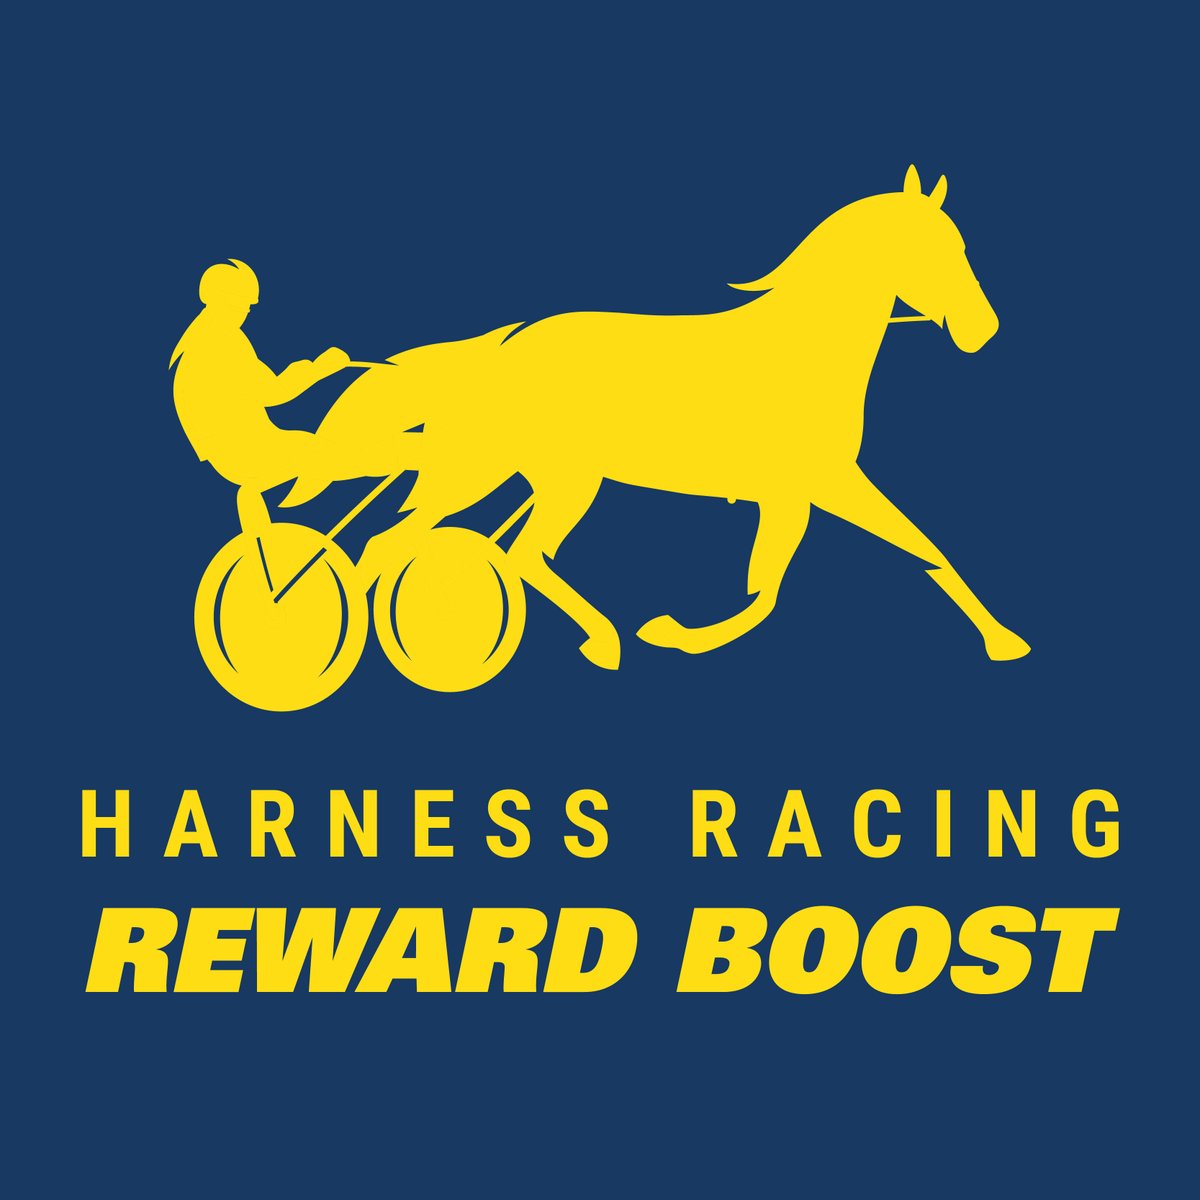 IT'S YOUR LAST CHANCE! Play the harness horses today to earn an extra 2.5% reward boost, up to $50, on North American Harness wagers! Play with AmWager.com now! #reward #makemoney #amwagerpromo #harnessracing 💥💵💰